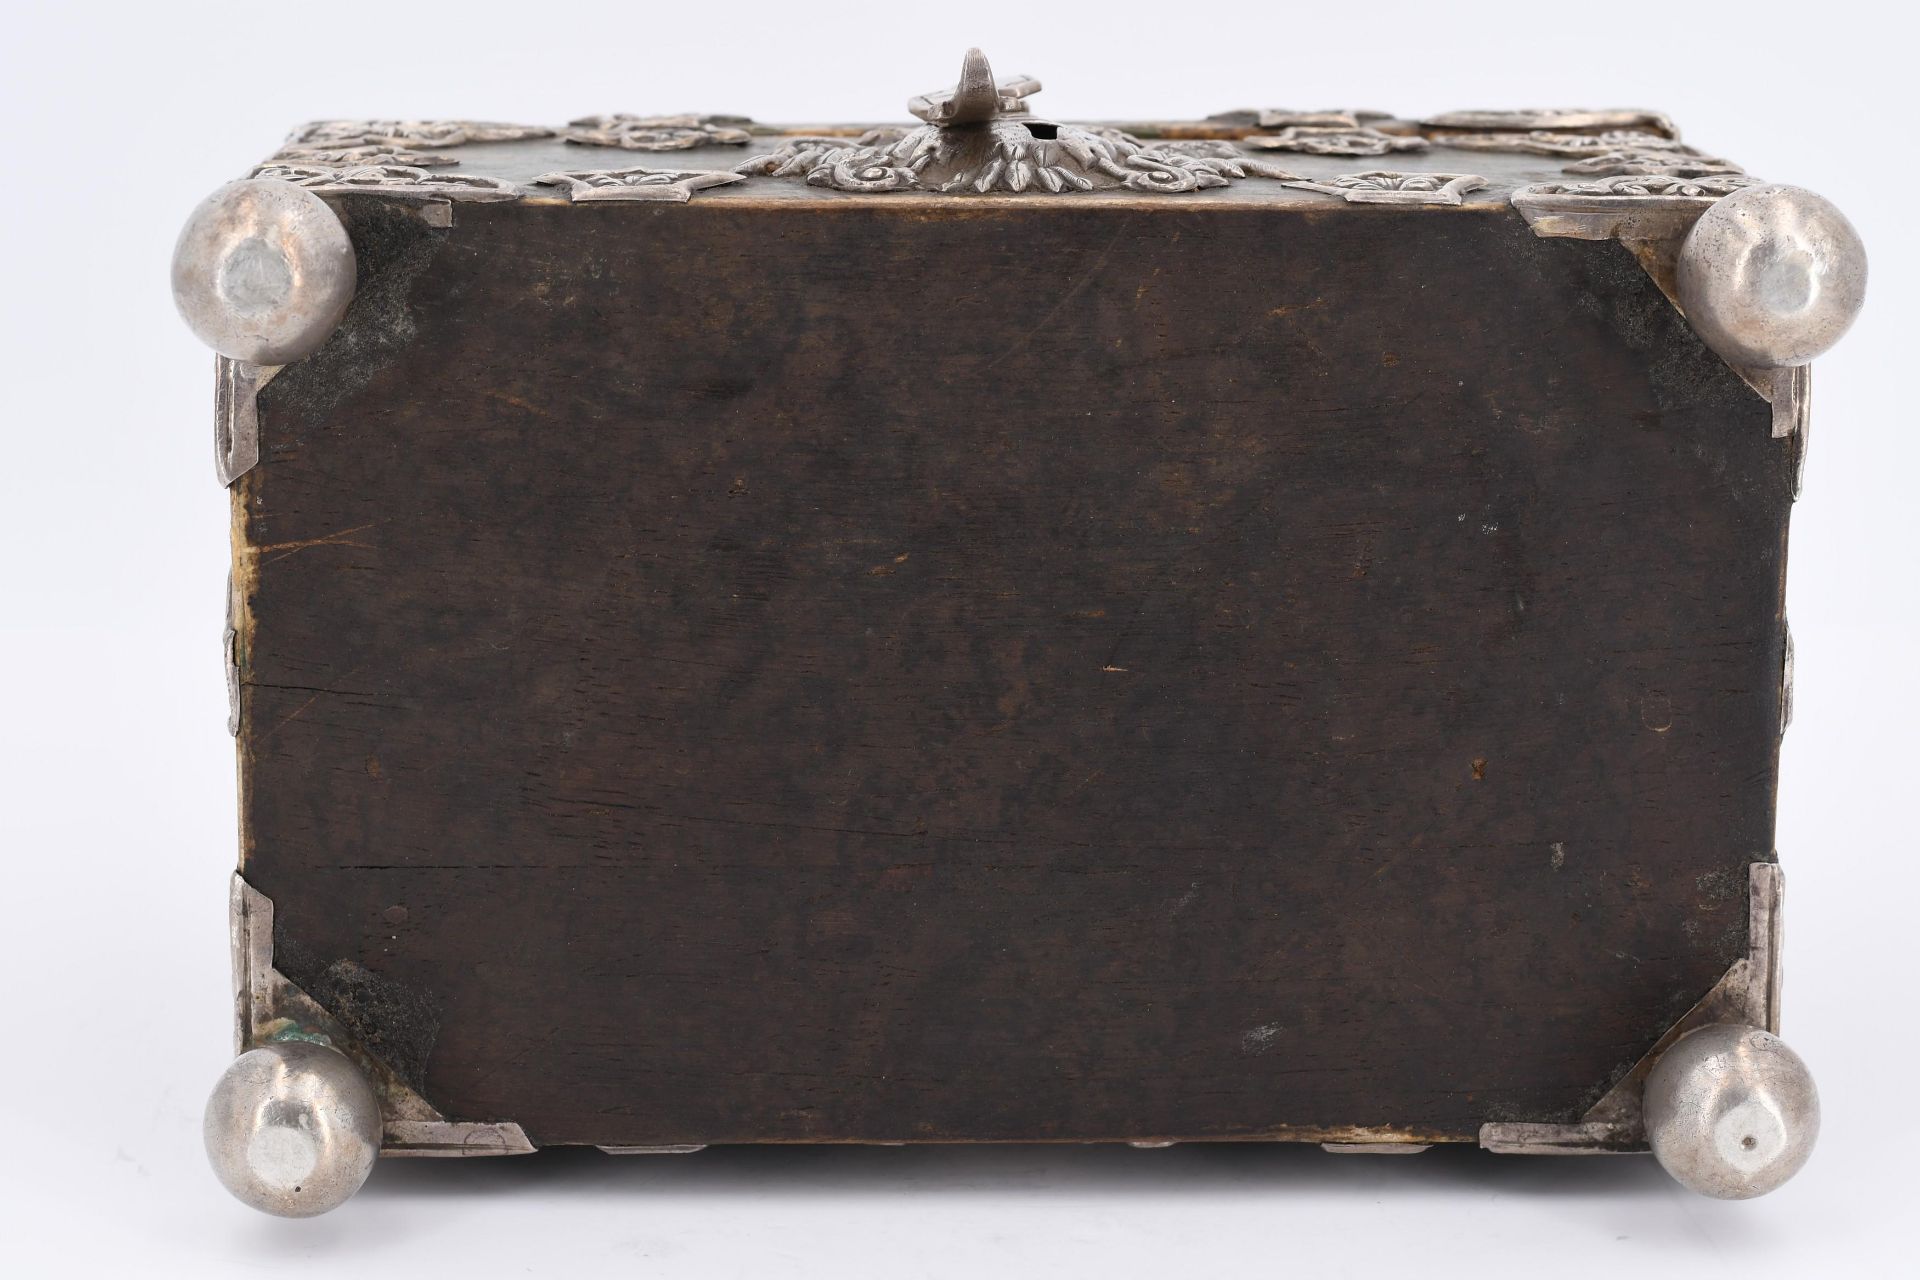 Small wooden casket with silver fittings - Image 6 of 6